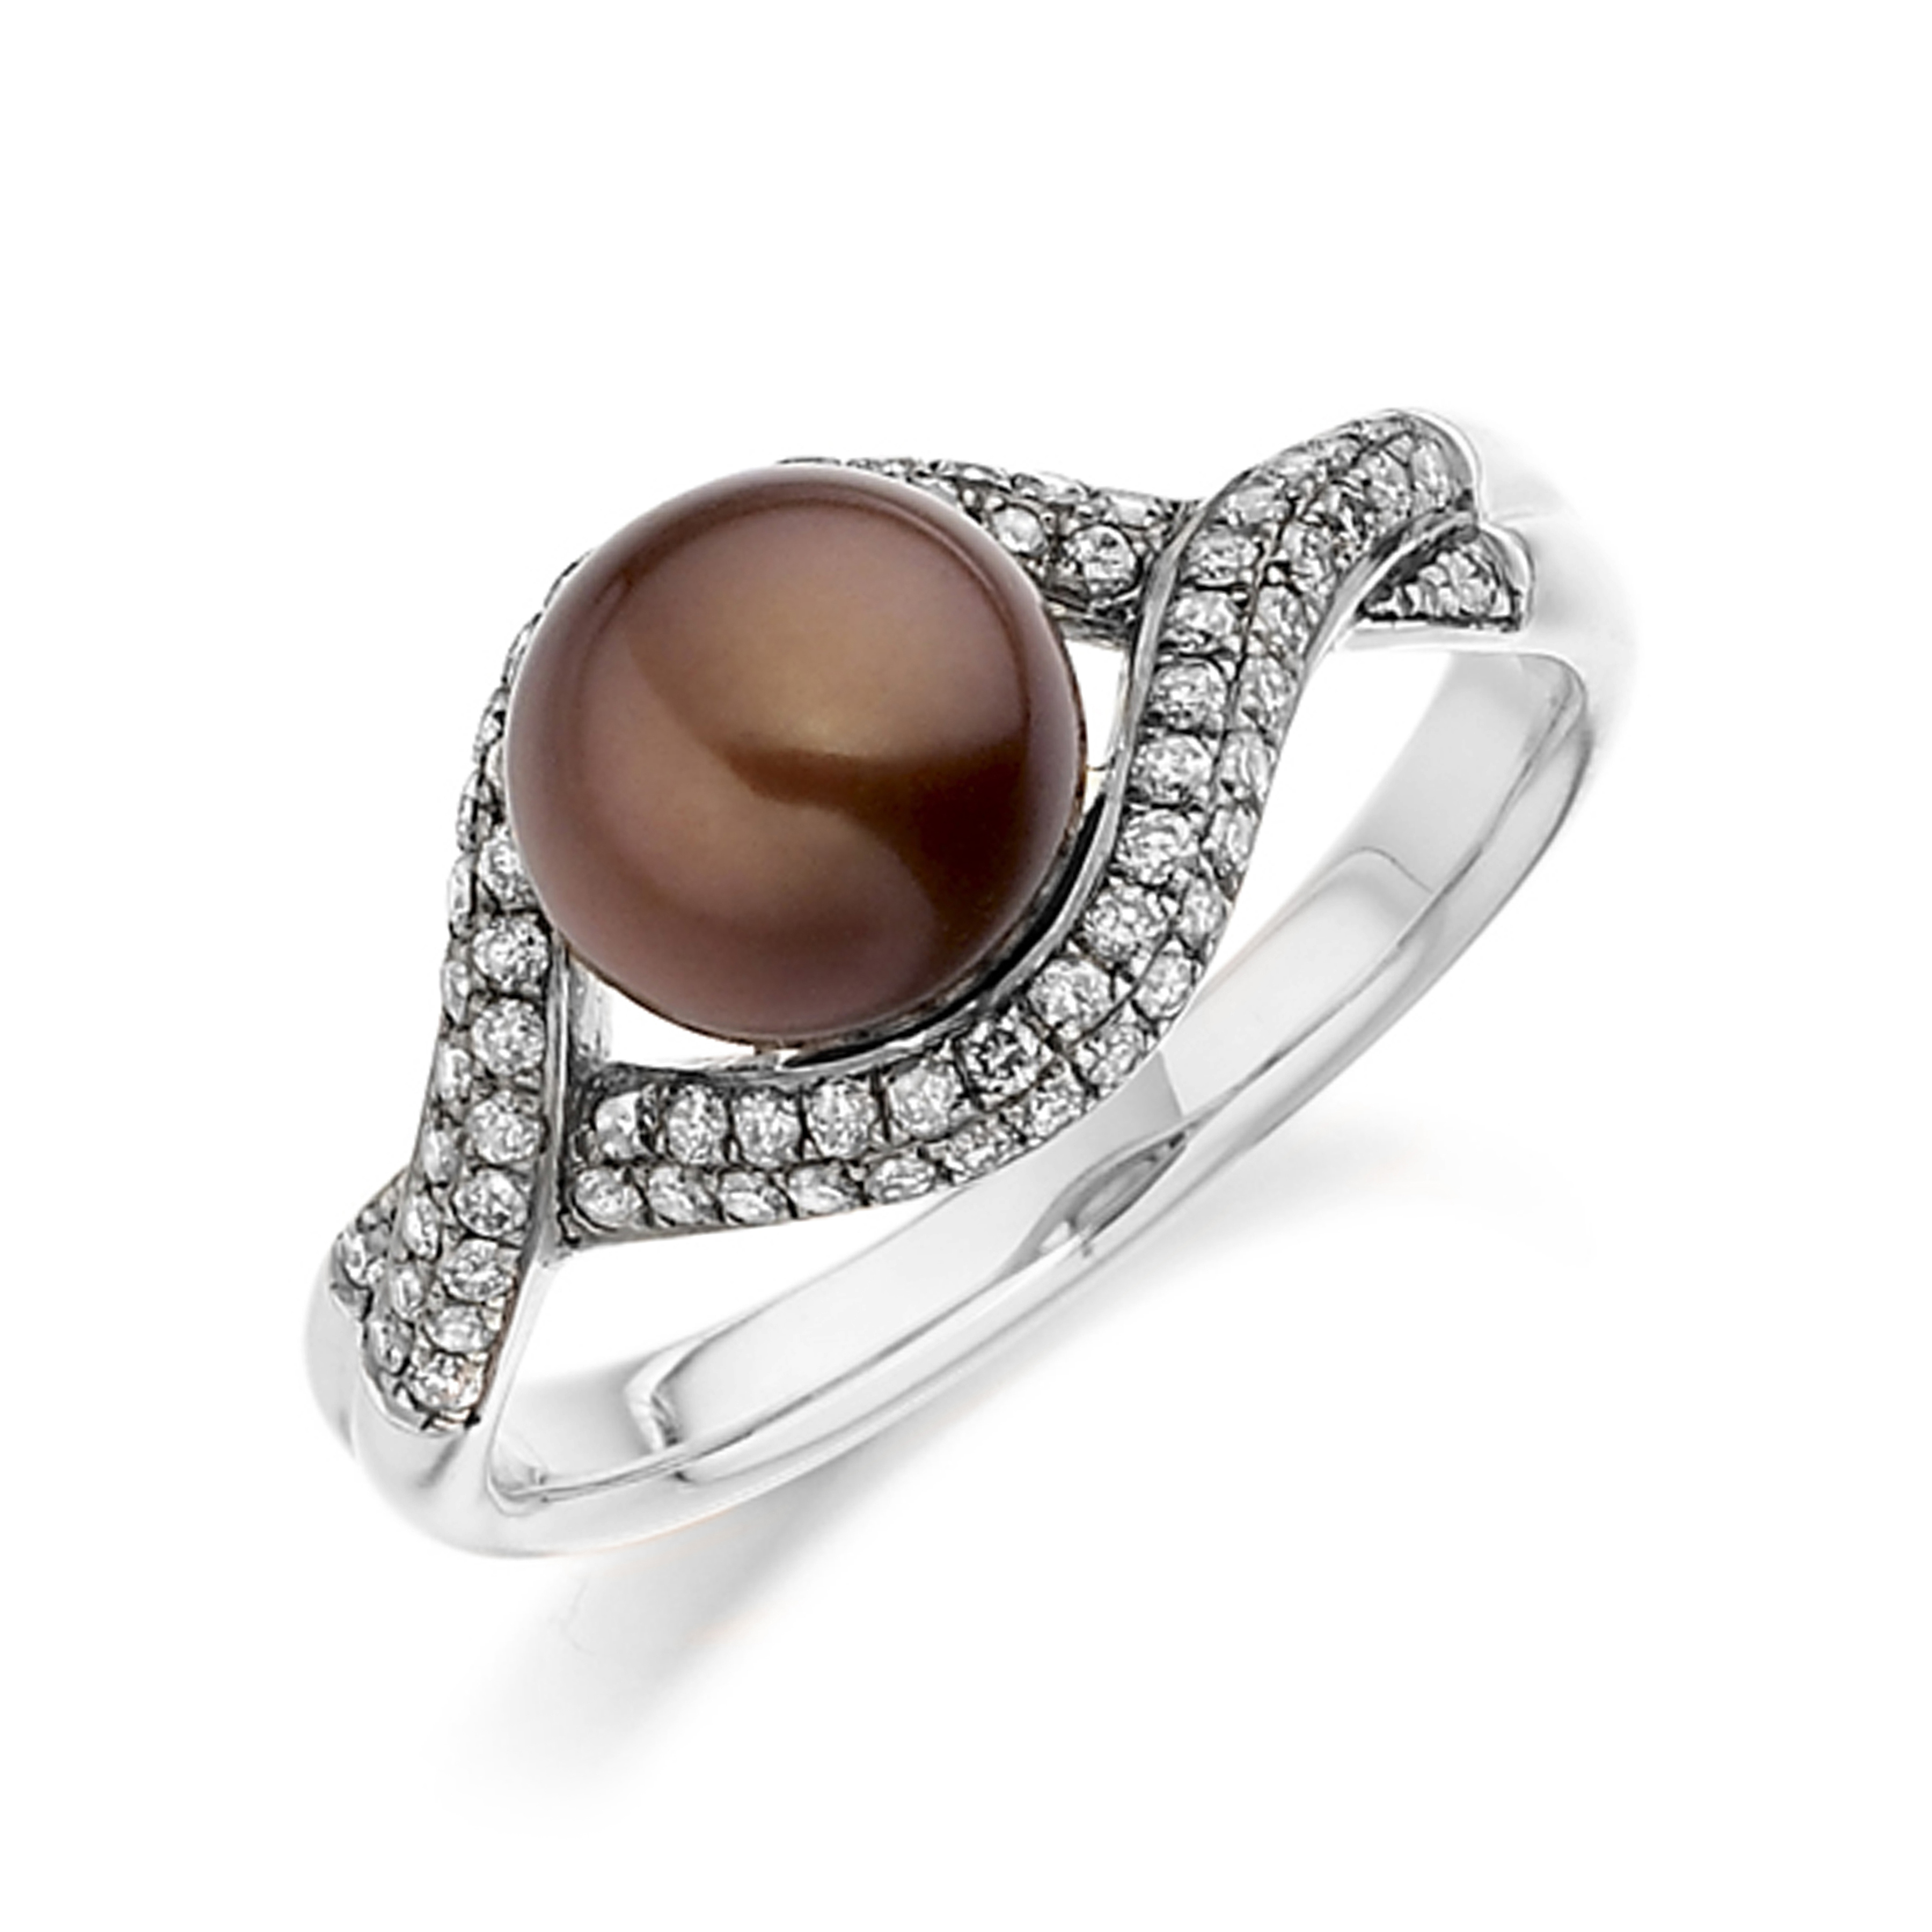 7mm Round Pearl Multiple Stones Diamond And Pearl Ring